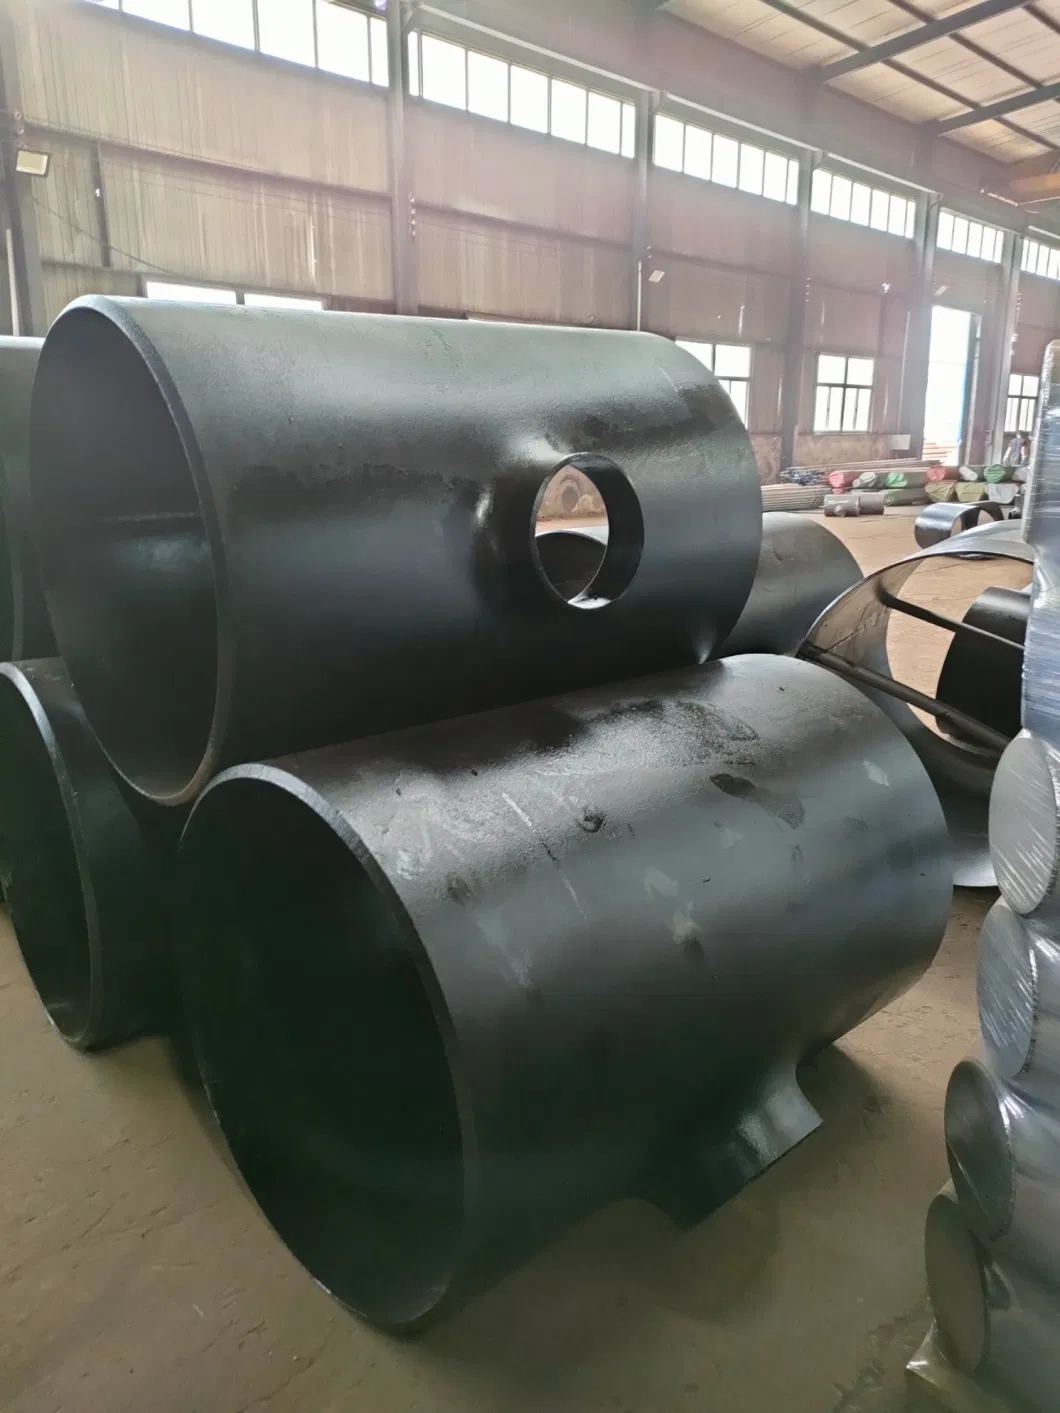 Equal Mild ASME B16.9 Wpb Reducing Seamless Forged Carbon Black Steel Butt-Welding Pipe Fitting Straight Reducer Tee